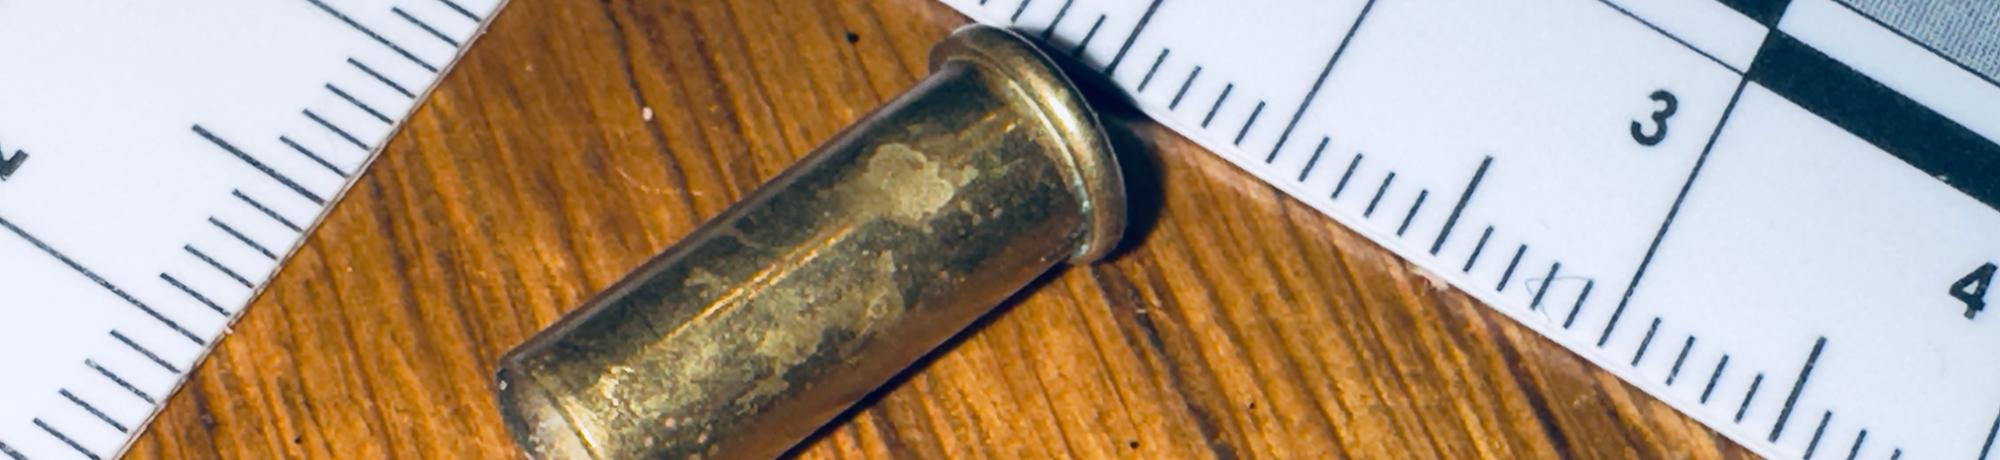 ruler next to a bullet casing on a wood floor